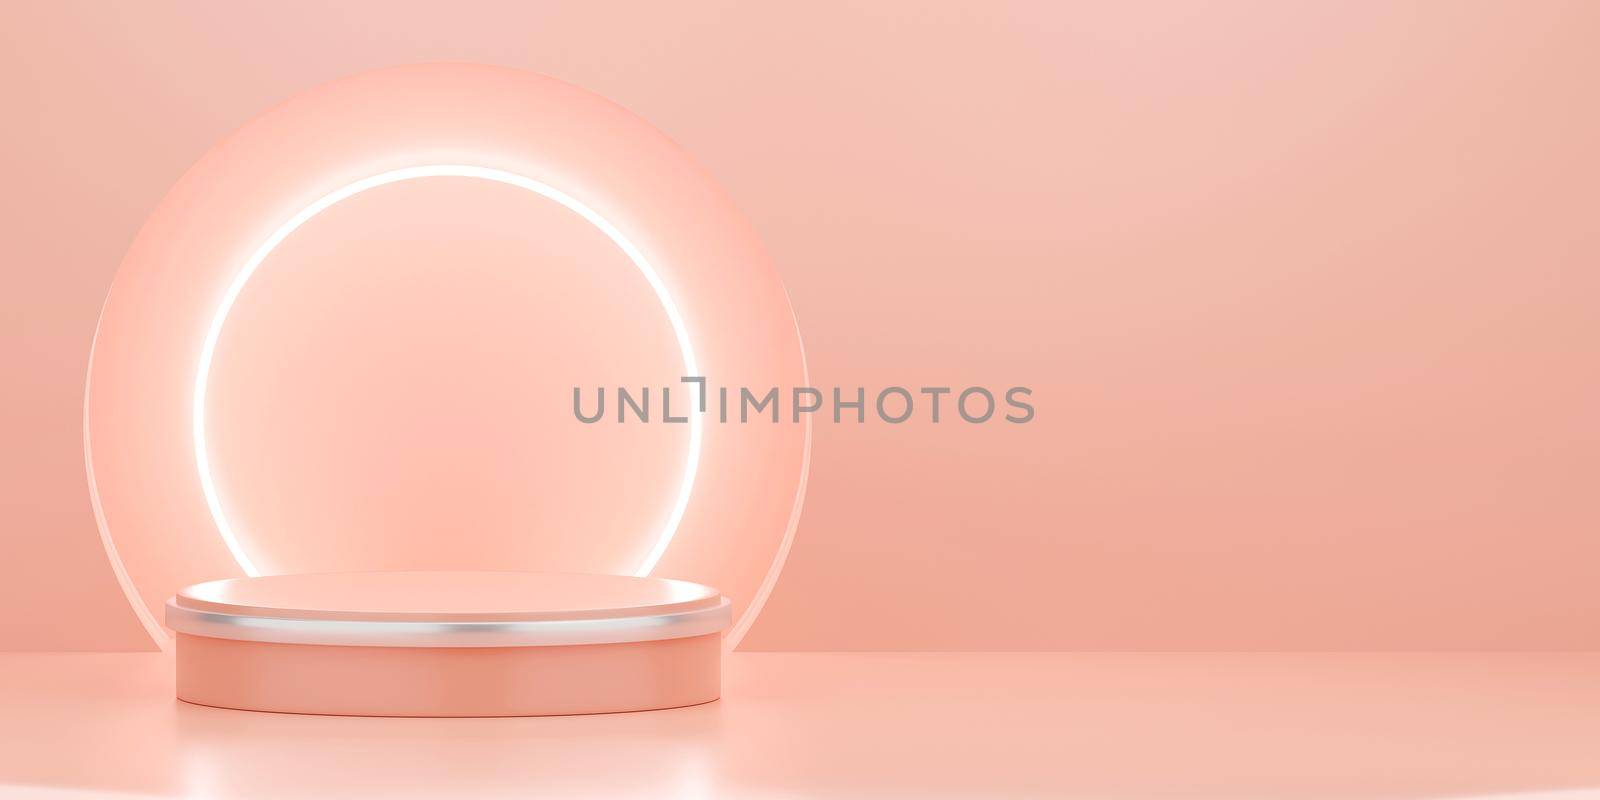 Scene of pastel color with geometric shape podium with lamp on pink background, 3d illustration